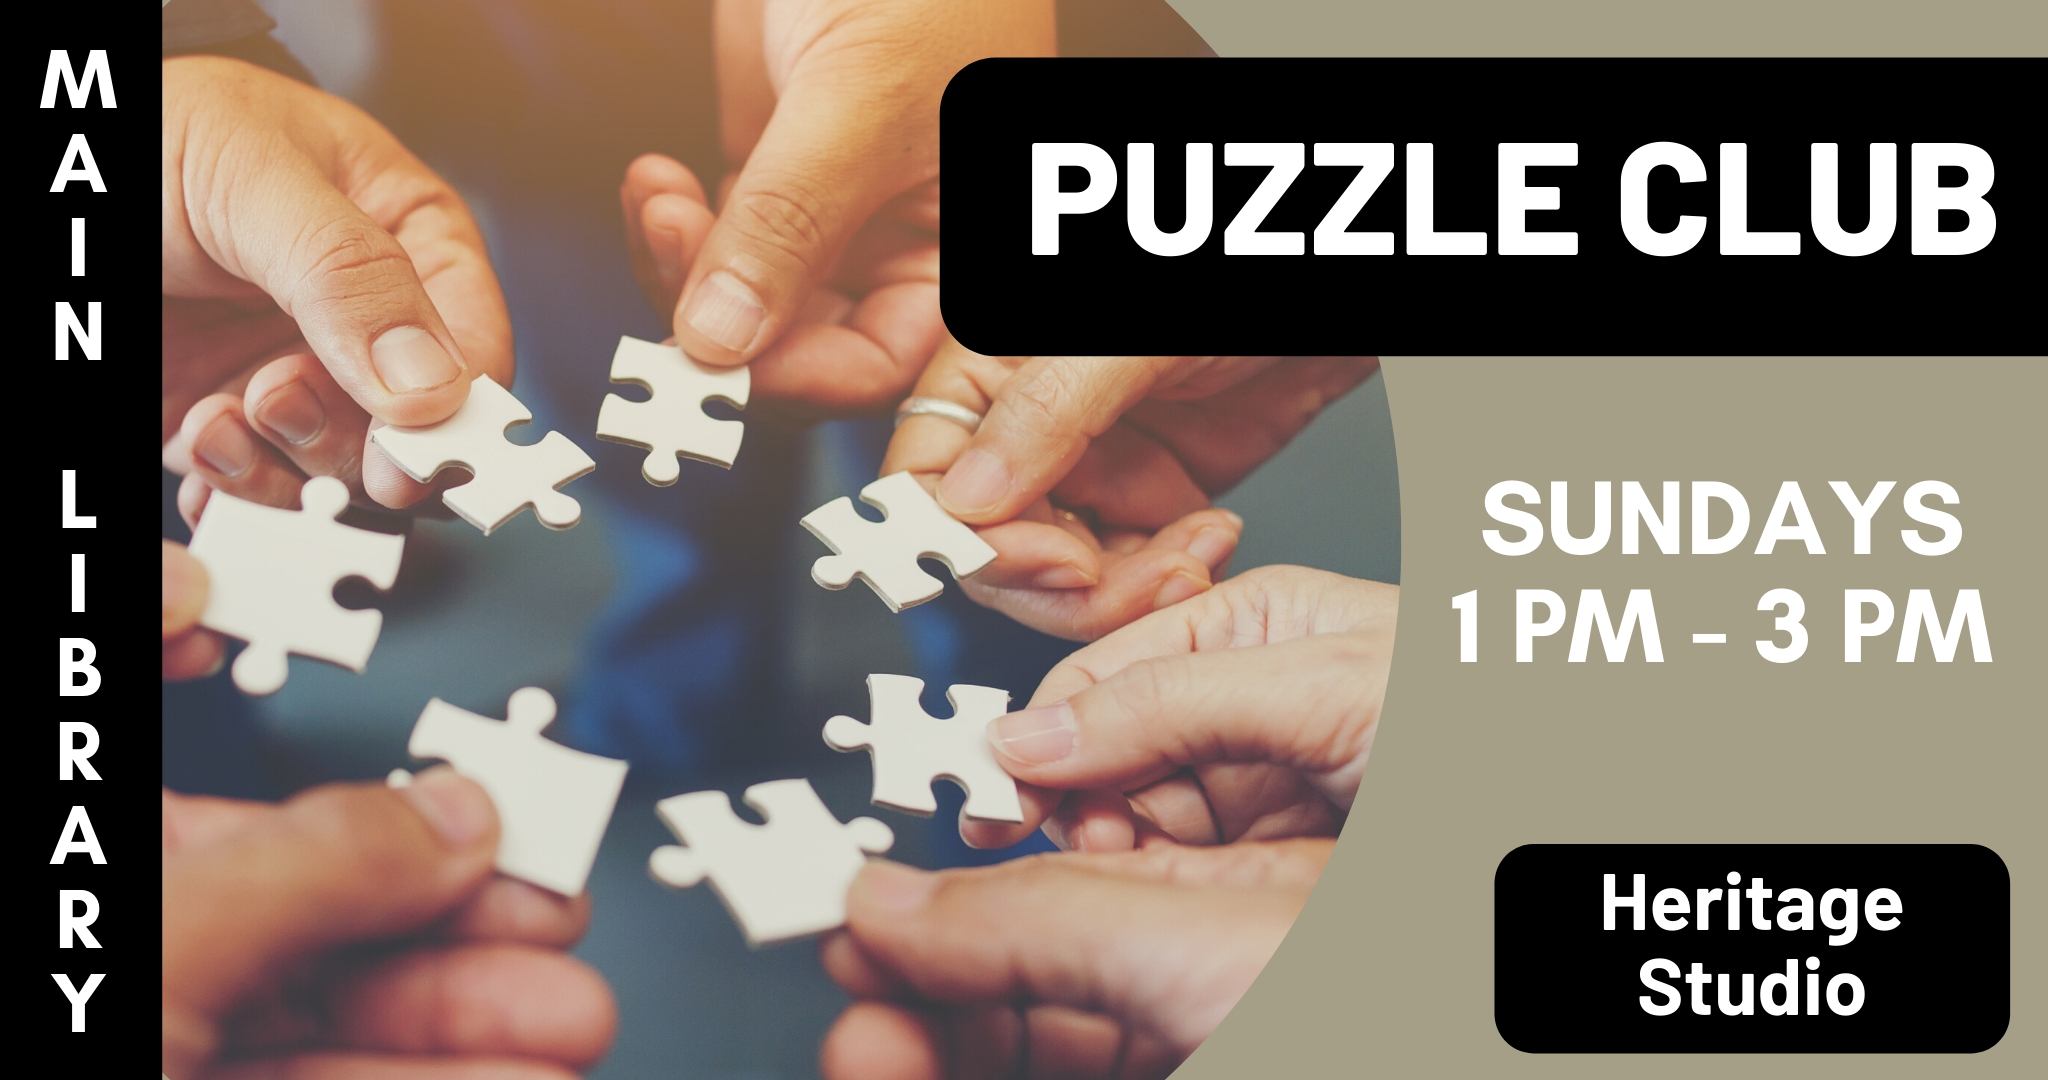 multiple hands holding puzzle pieces. Text Main Library Puzzle Club Sundays 1 PM - 3 PM Heritage Studio 